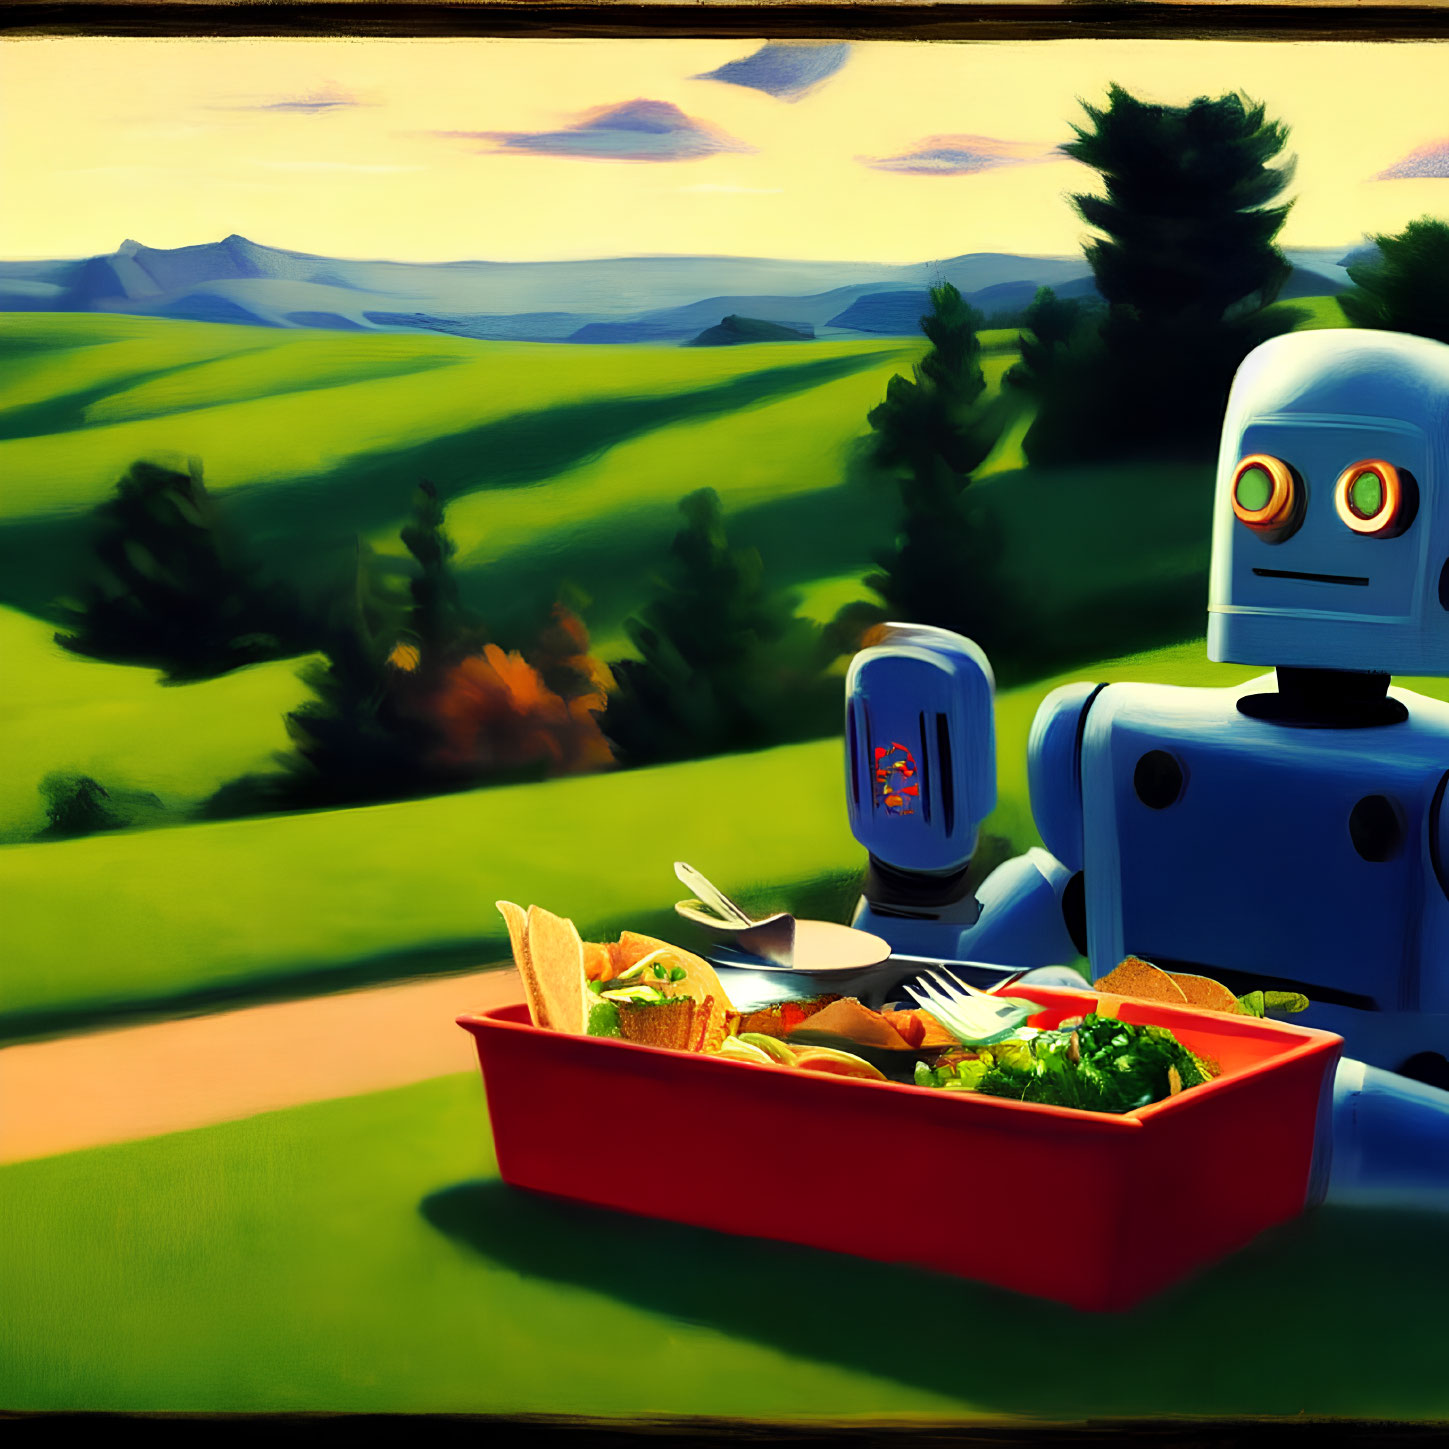 Robot with lunchbox on grassy hillside in hilly landscape.